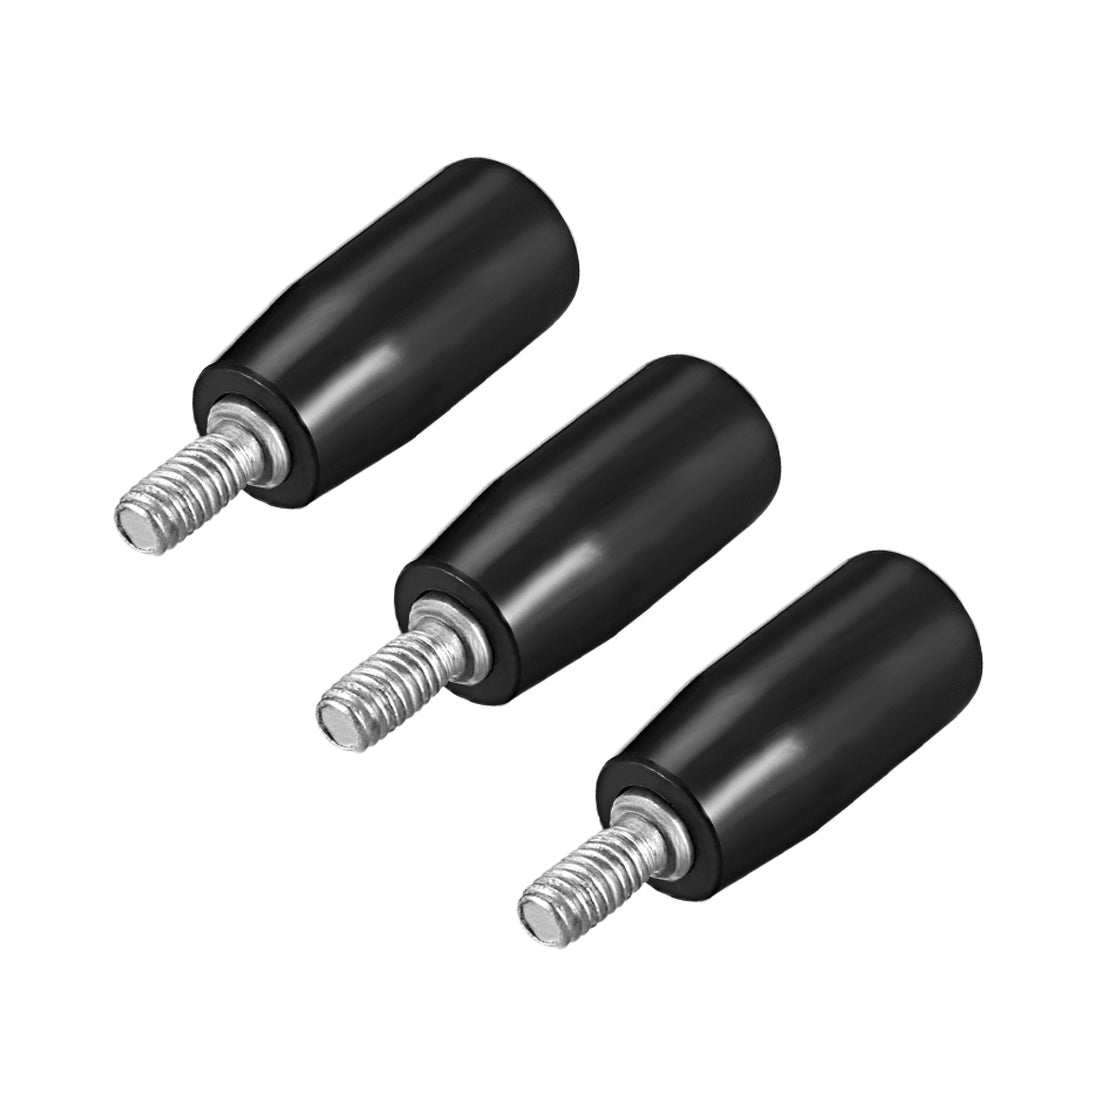 uxcell Uxcell 3 Pcs Revolving Handwheel Machine Handle M6 Male Threaded Stem for Milling Machine